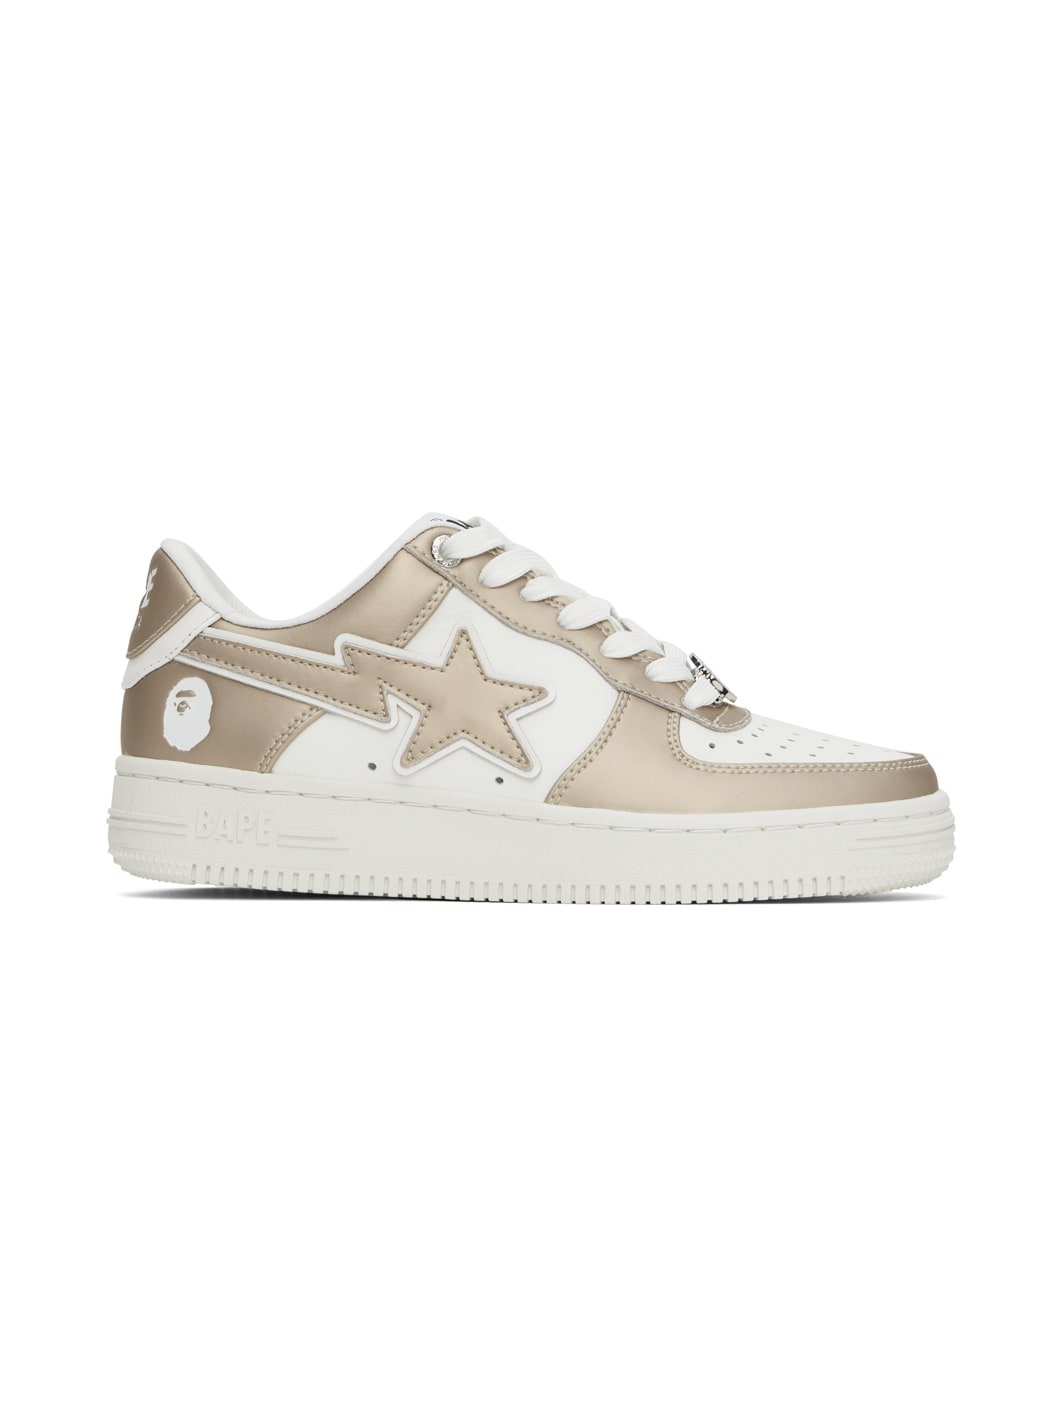 White & Gold STA #4 Sneakers - 1